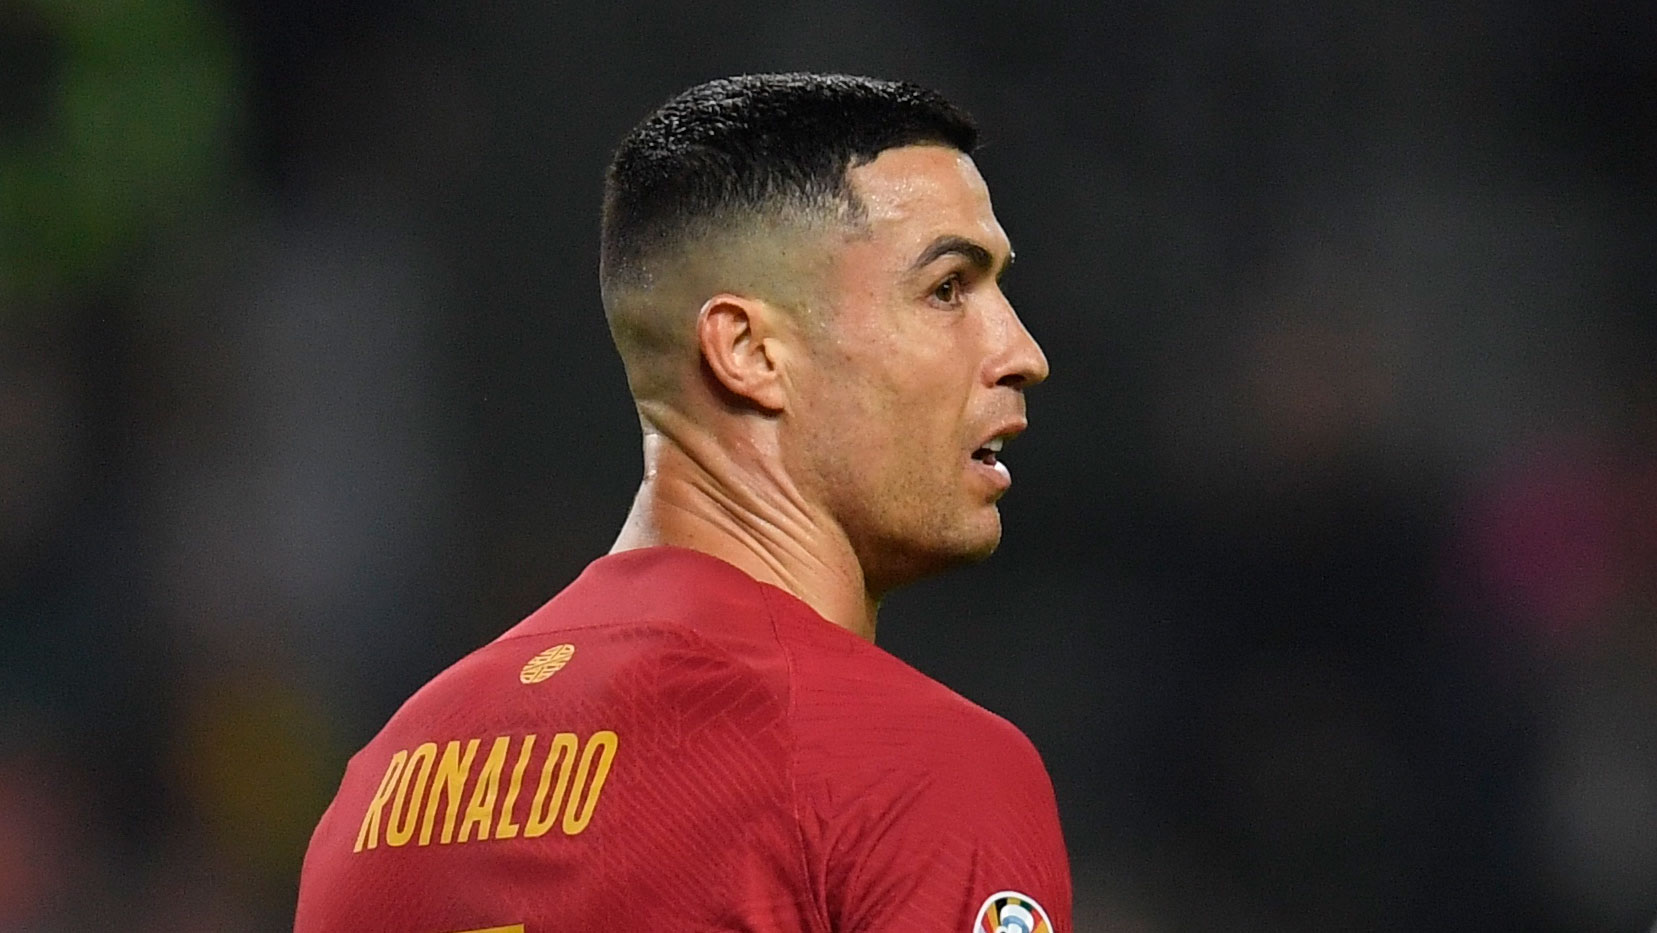 How To Get The Cristiano Ronaldo Side Part Haircut or High Fade - NO GUNK